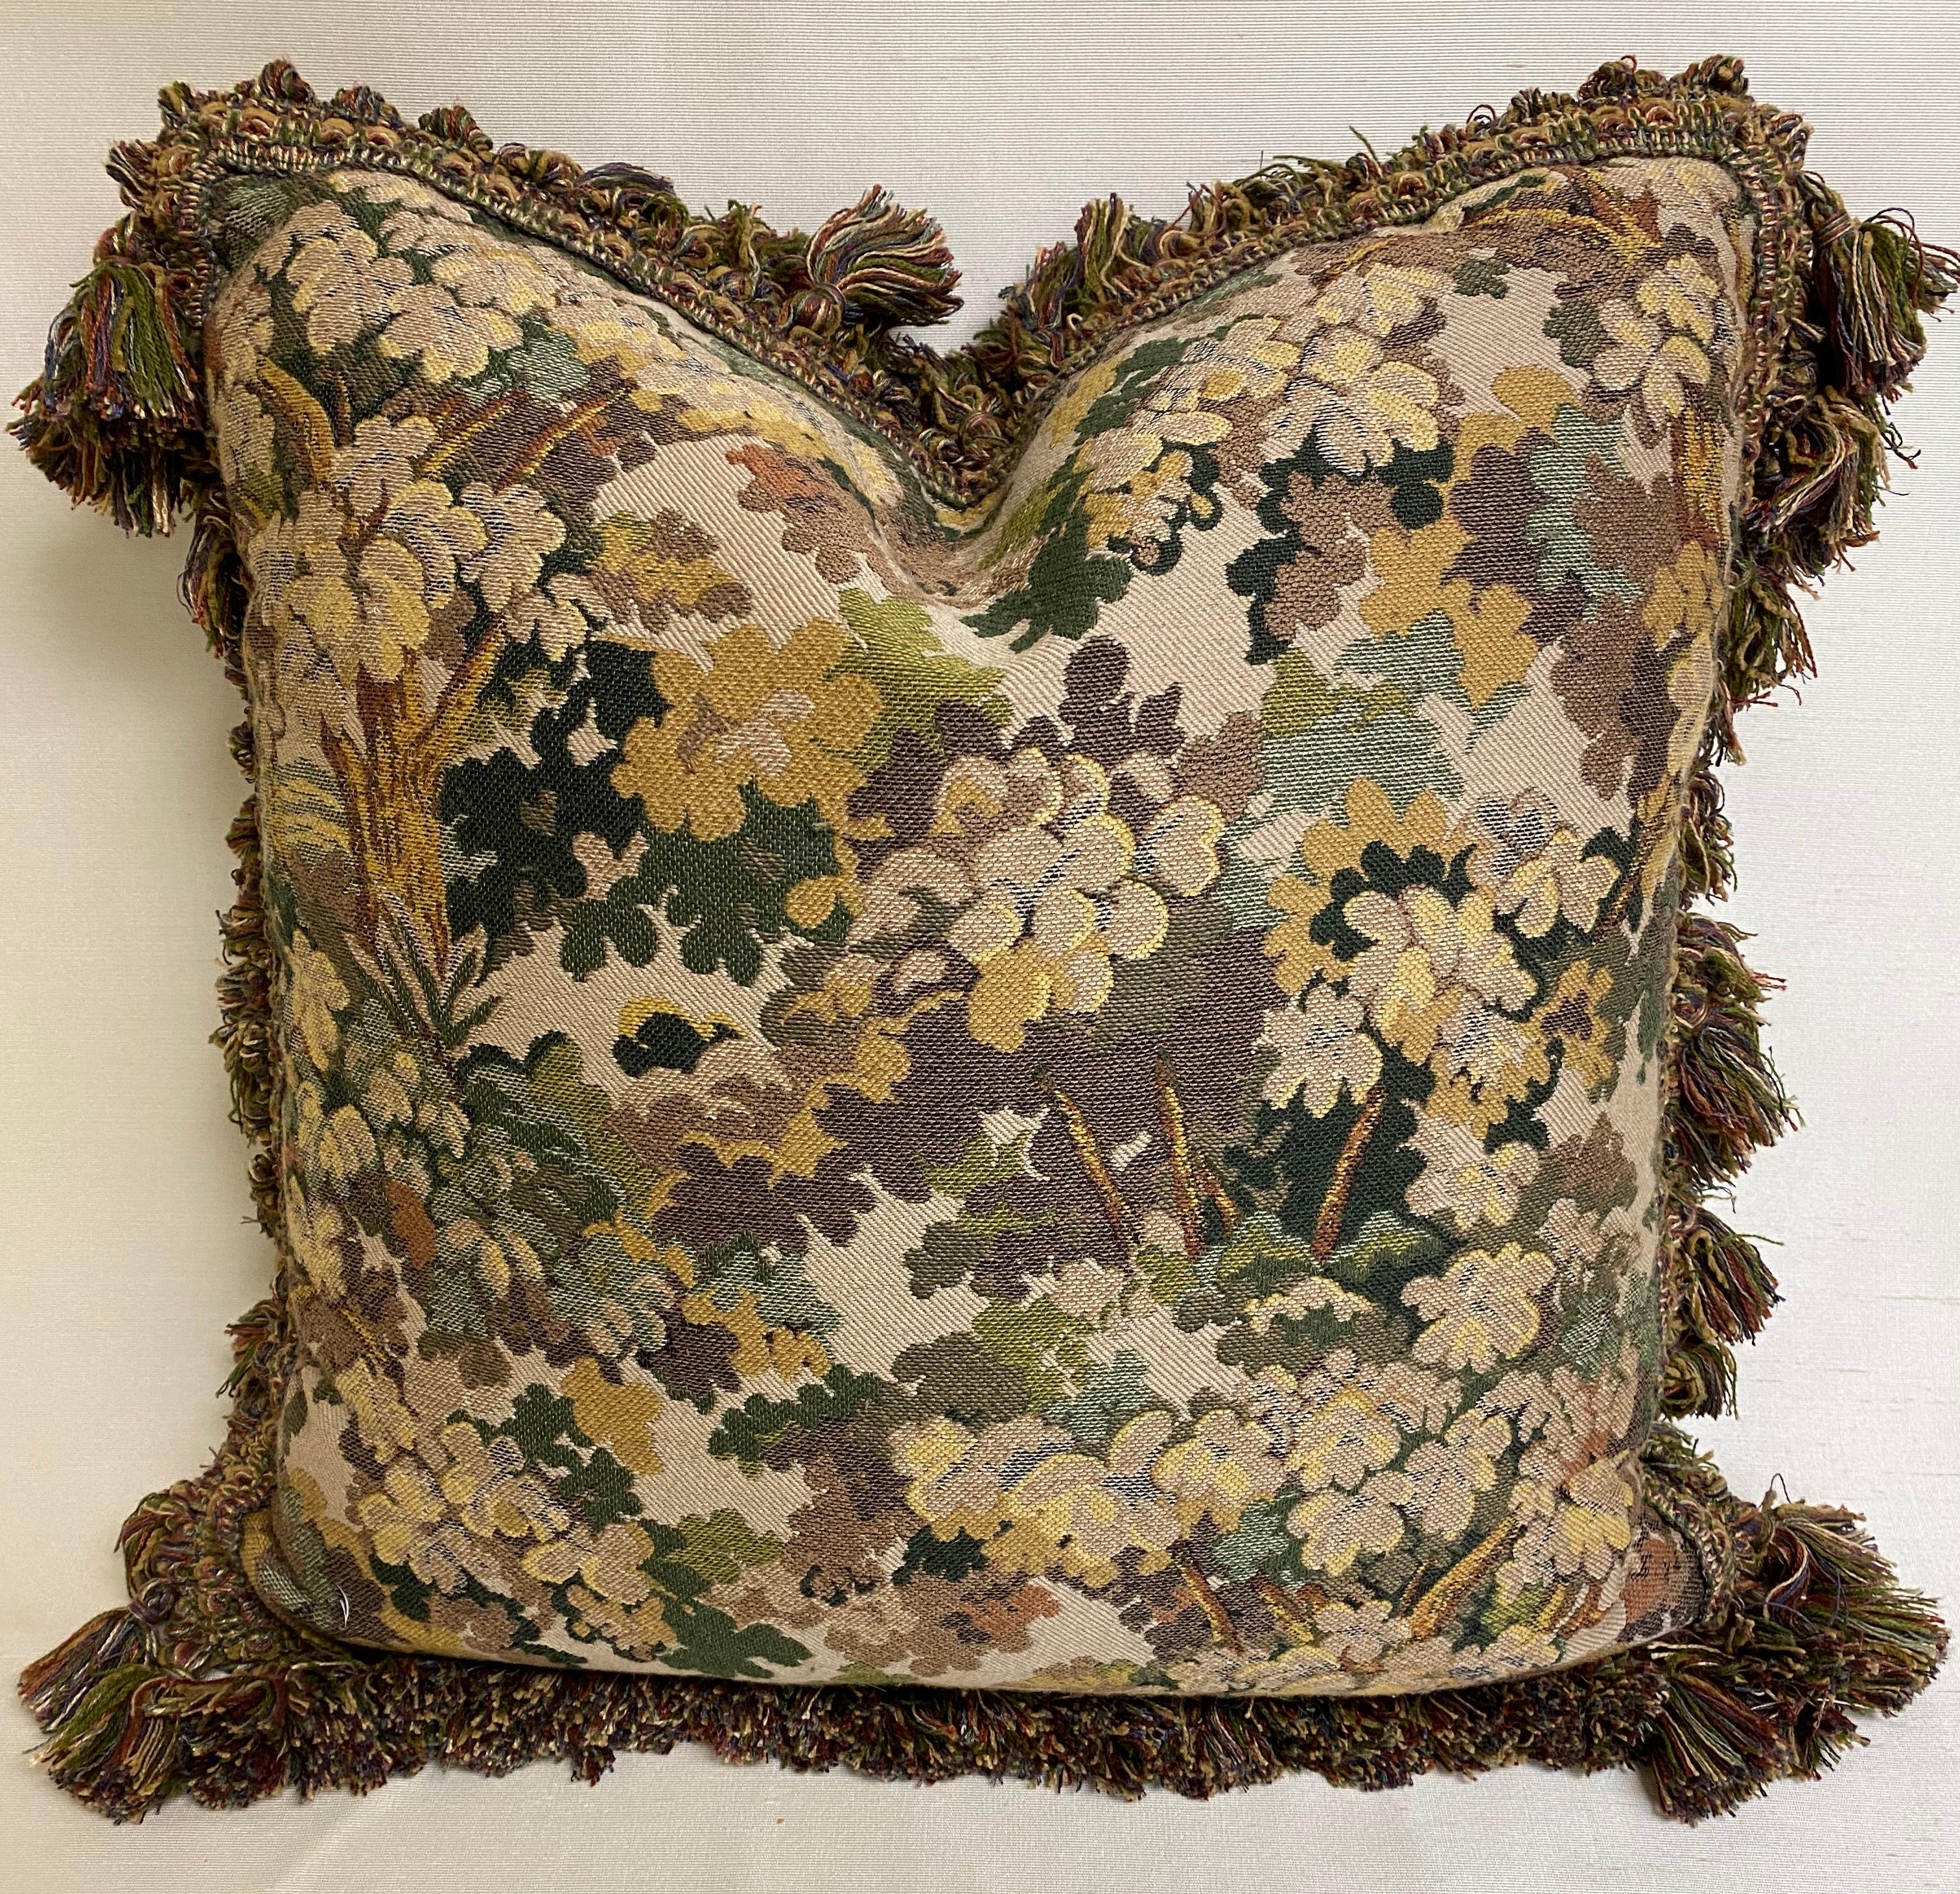 Large pair of verdure tapestry style down-filled cushions with fringe.
Measures: 23 inches square.